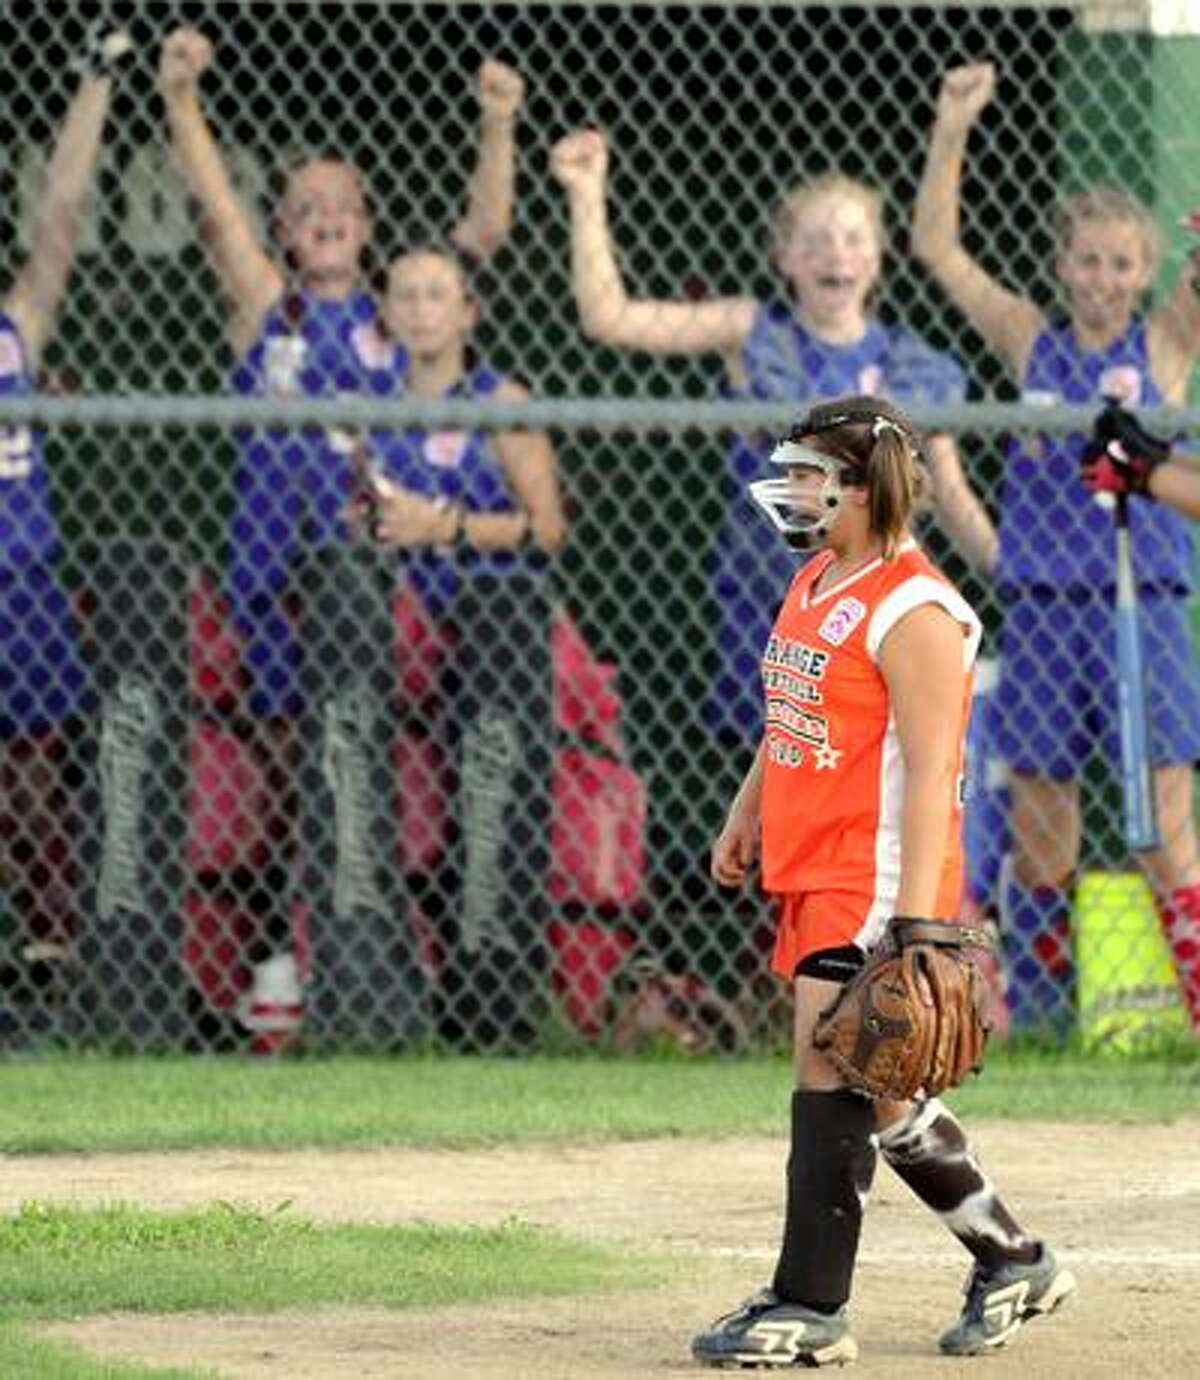 The Waterford bench cheers as a run scores while Orange's Teresa Marchitto looks on during the third inning of Waterford's 7-1 win Tuesday at Whiteley Field in Jewett City. (Peter Hvizdak/Register)